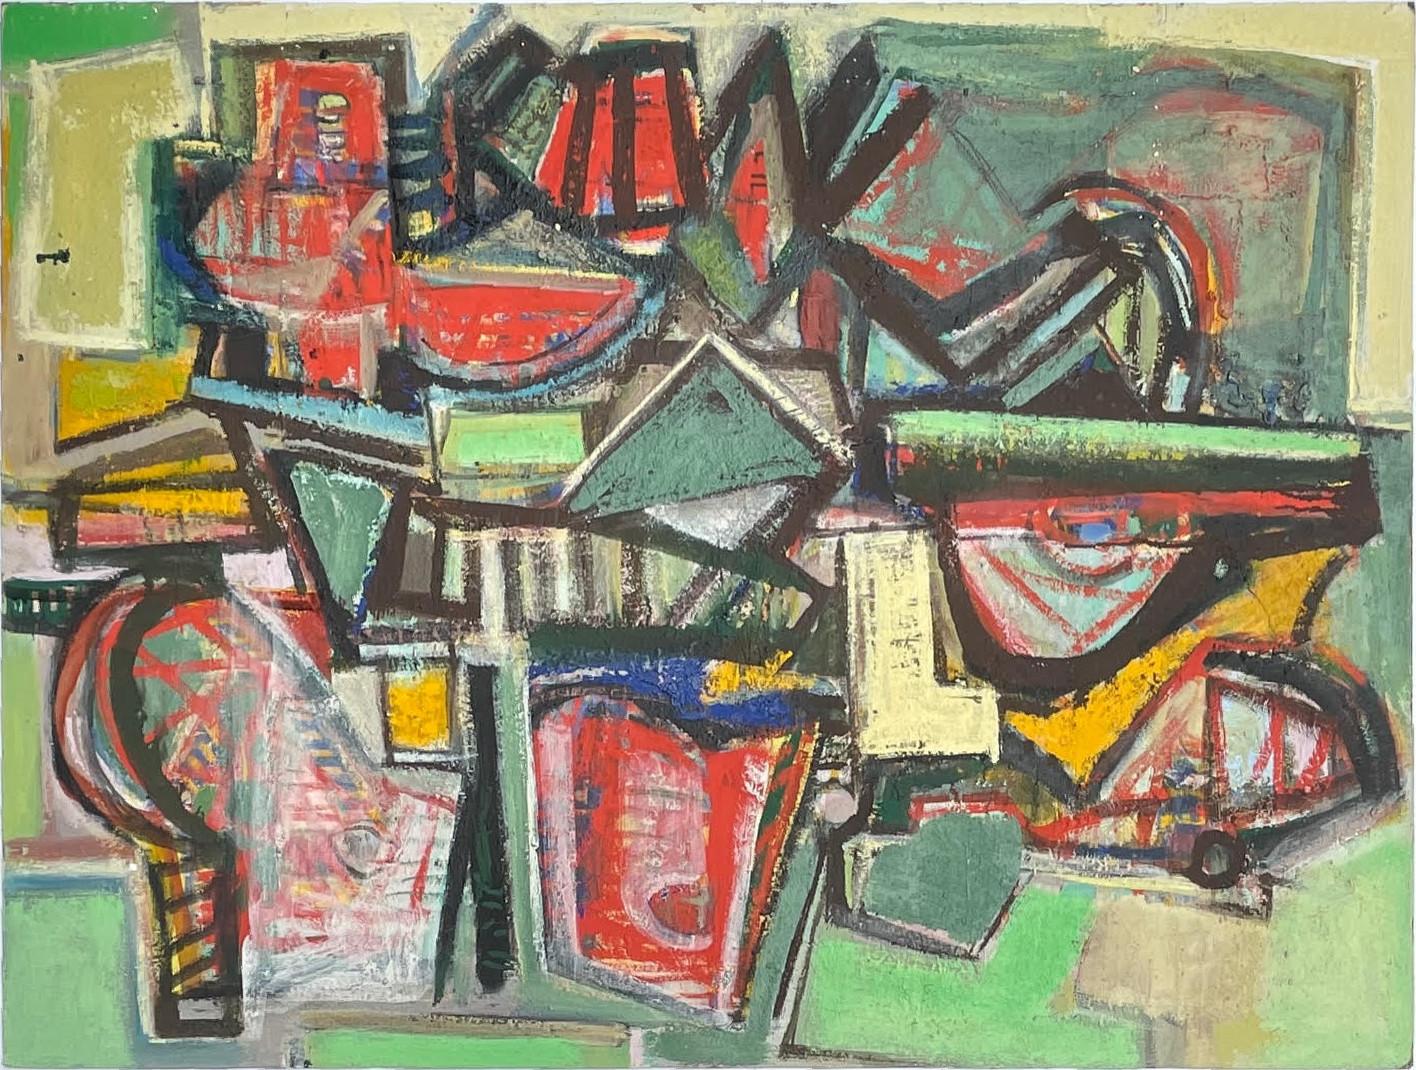 Ben Wilson Figurative Painting - Ozymandias (unique, signed Abstract Expressionist painting by renowned painter)